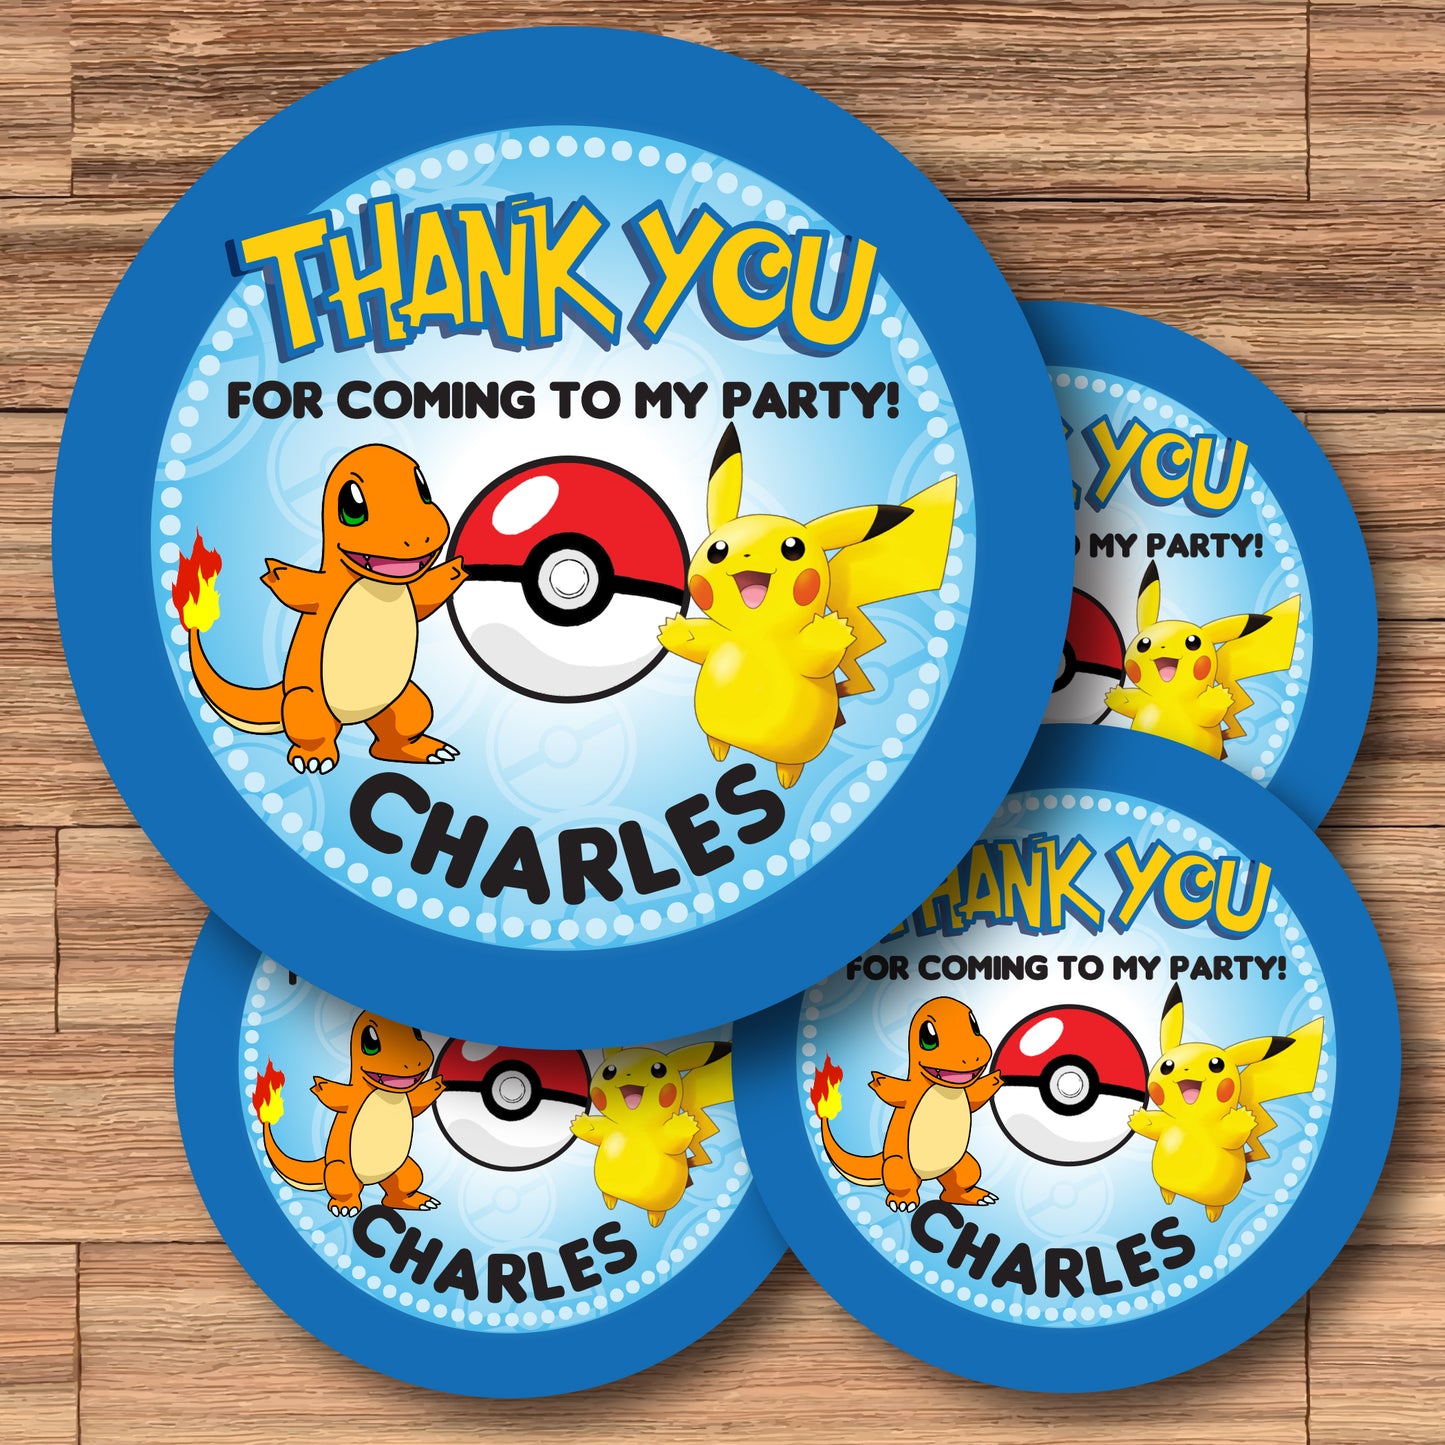 POKEMON Party Digital or Printed Custom Stickers for Gift Bags, Party Favors! Charizard and Pikachu!